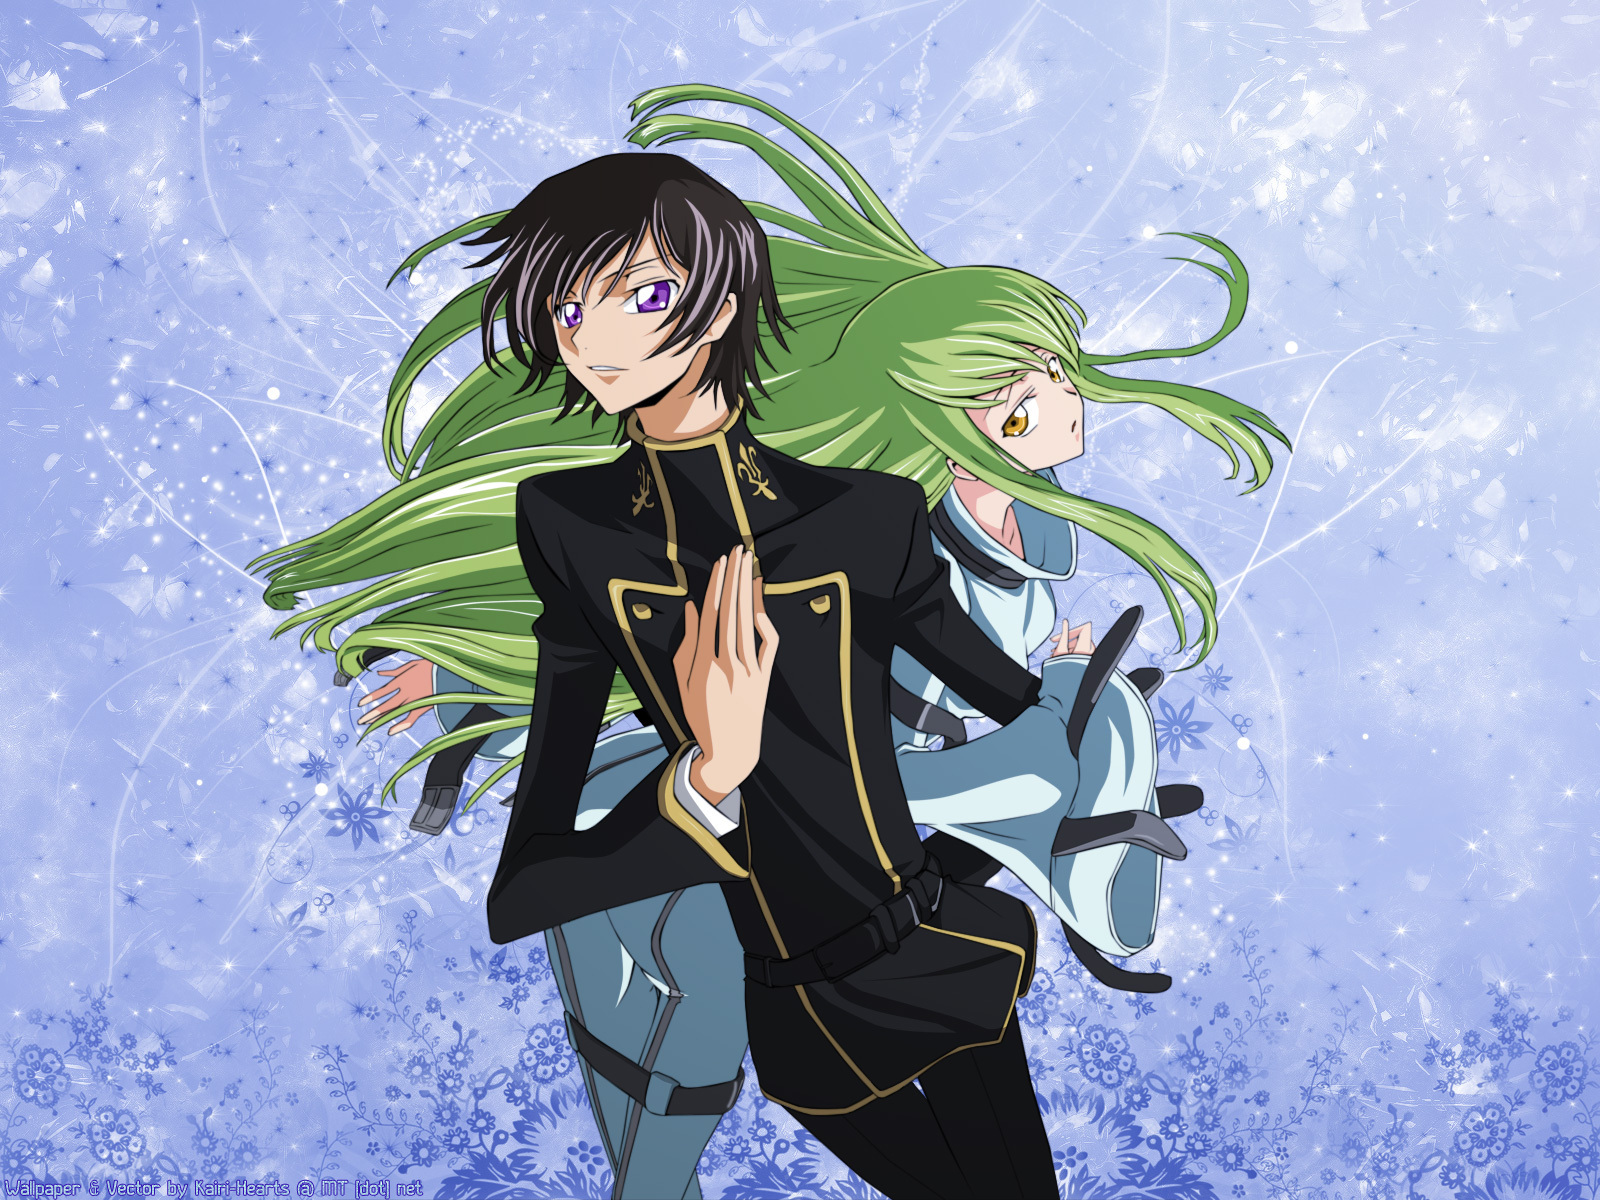 Pictures Code Geass Anime 1600x1200